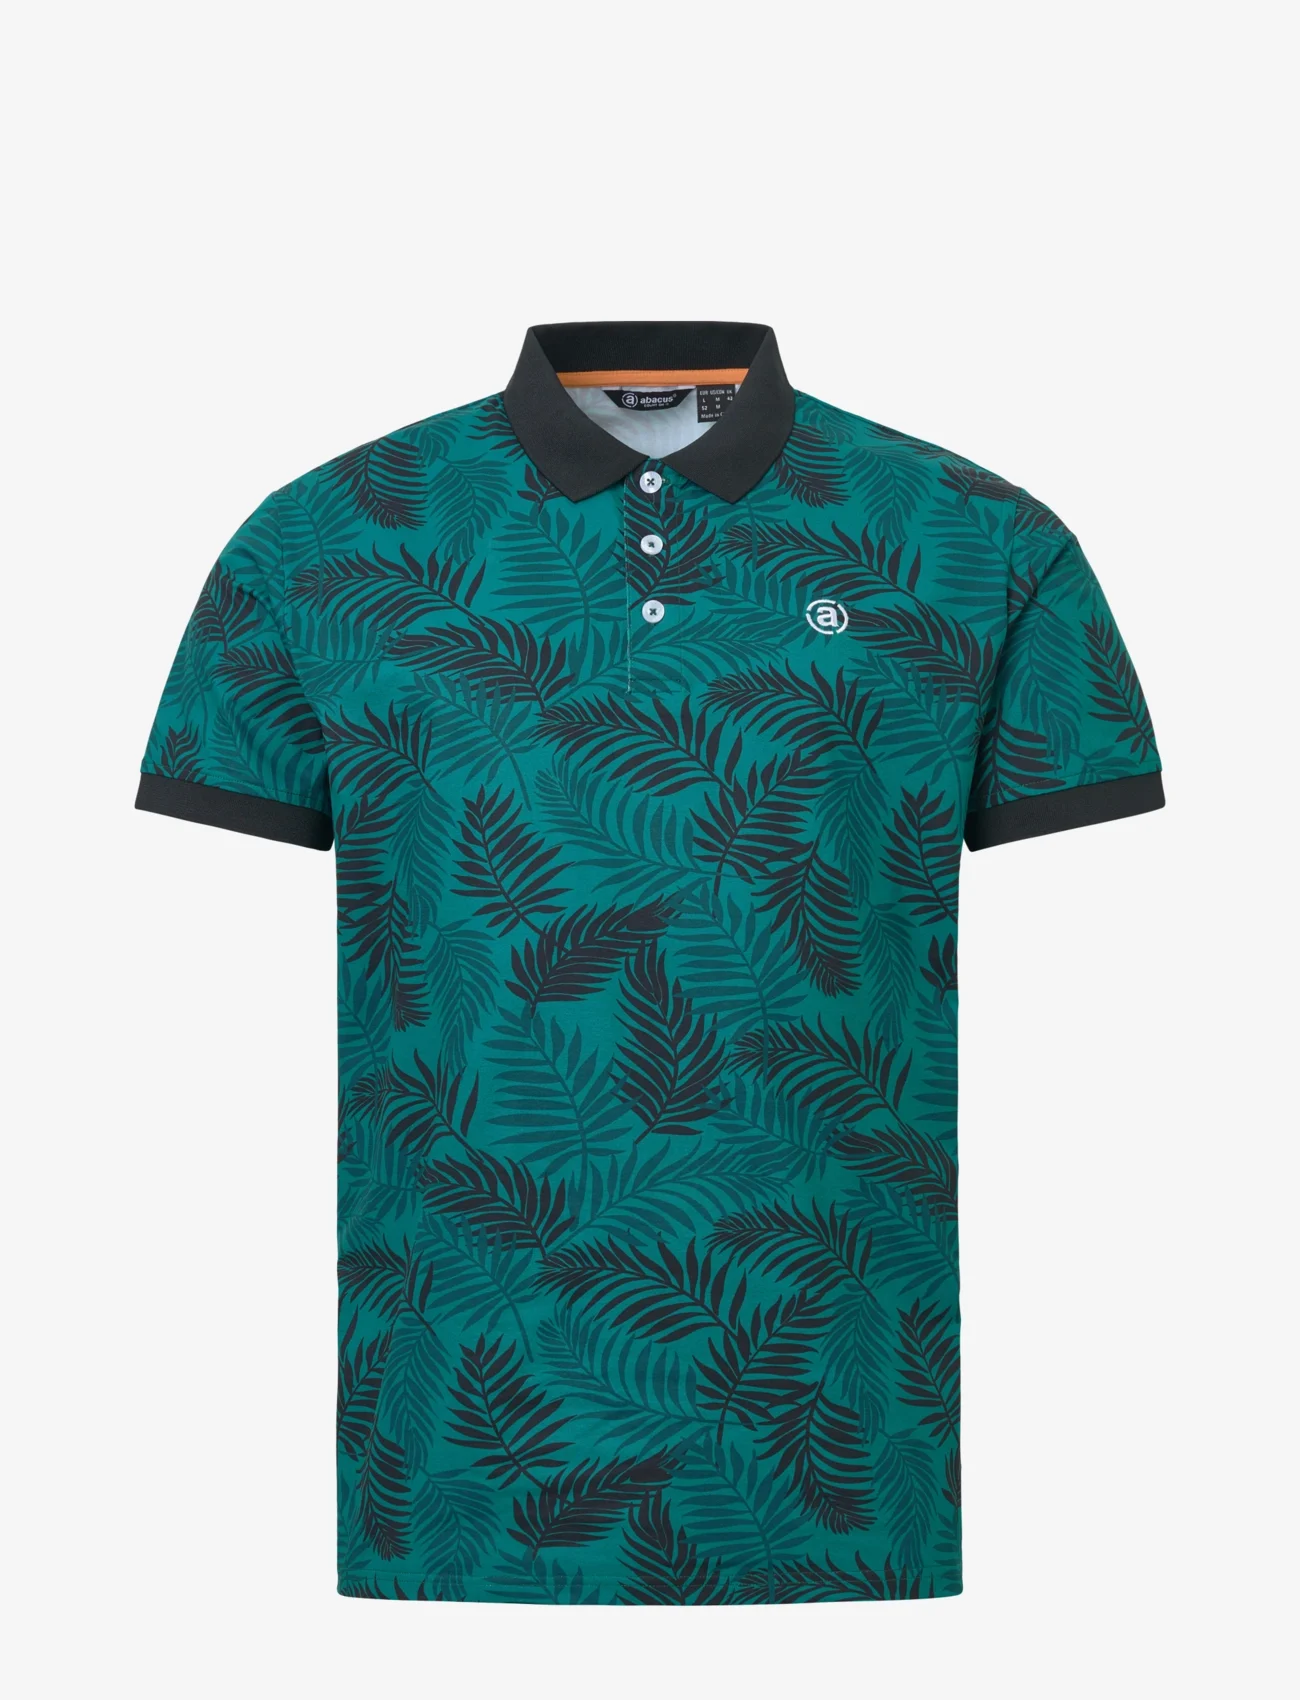 Abacus - Mens Wickham drycool polo - polos - teal - 1